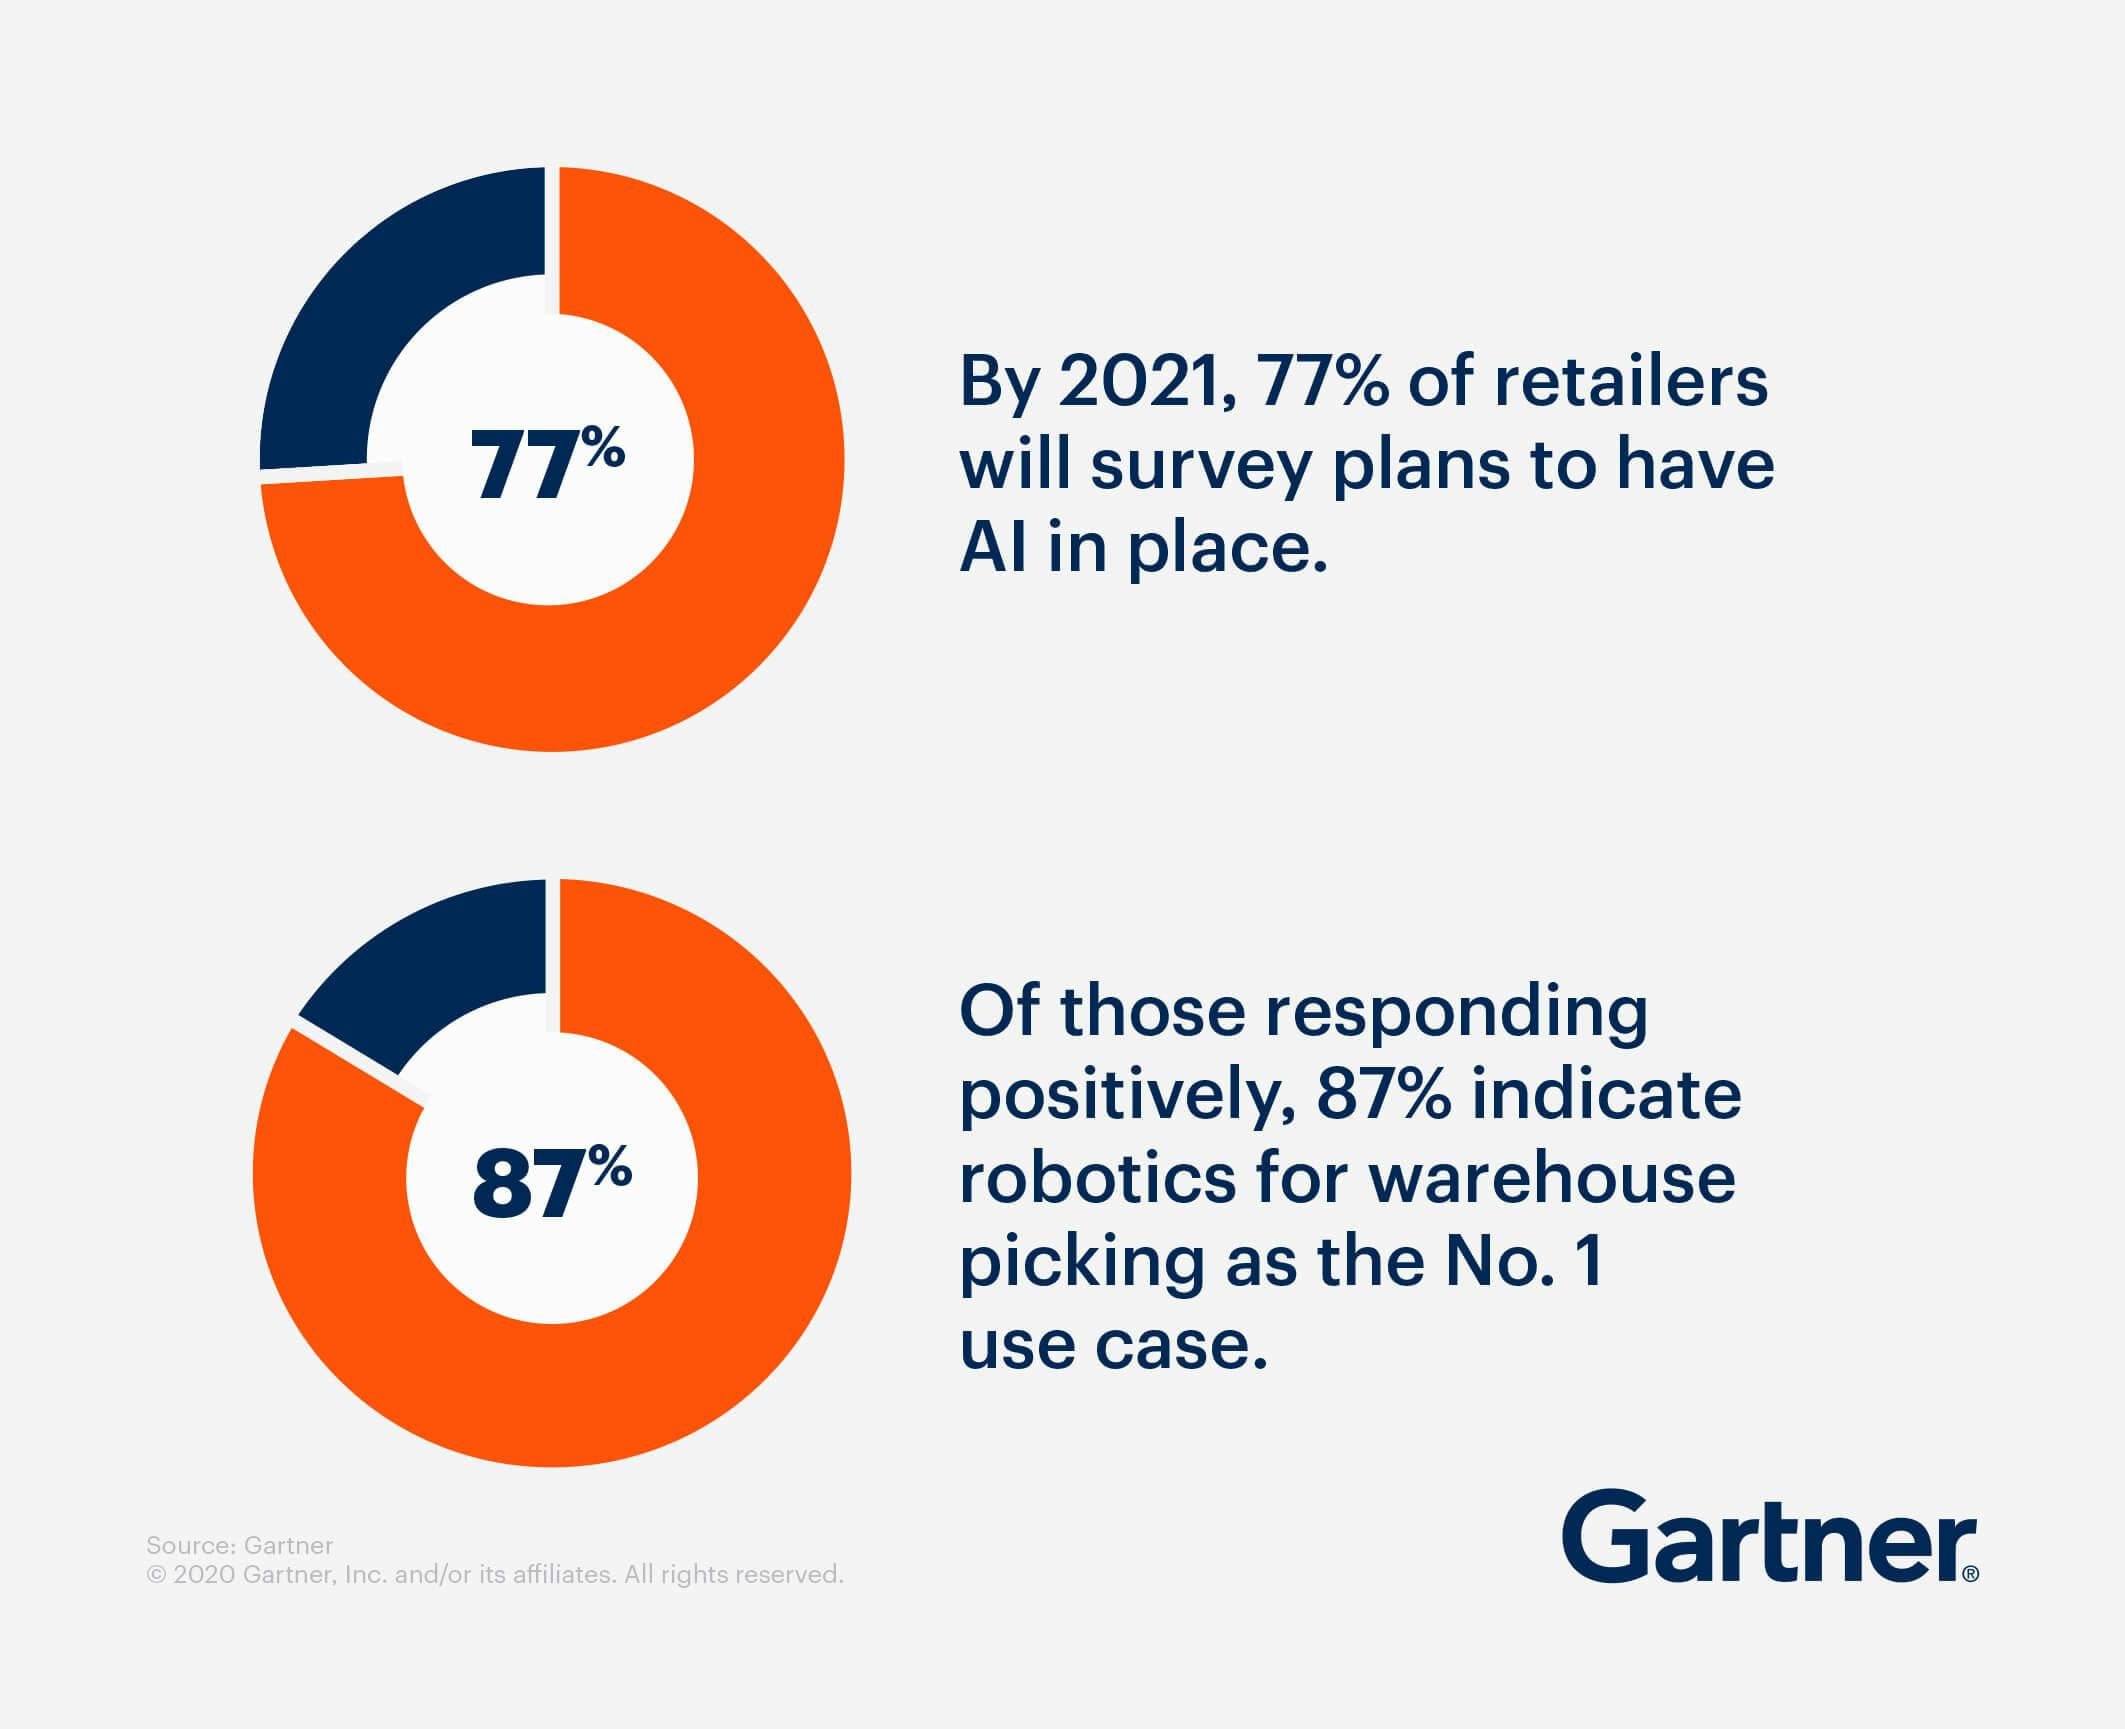 Gartner Research: Emerging trends in retail and how artificial intelligence is accelerating this